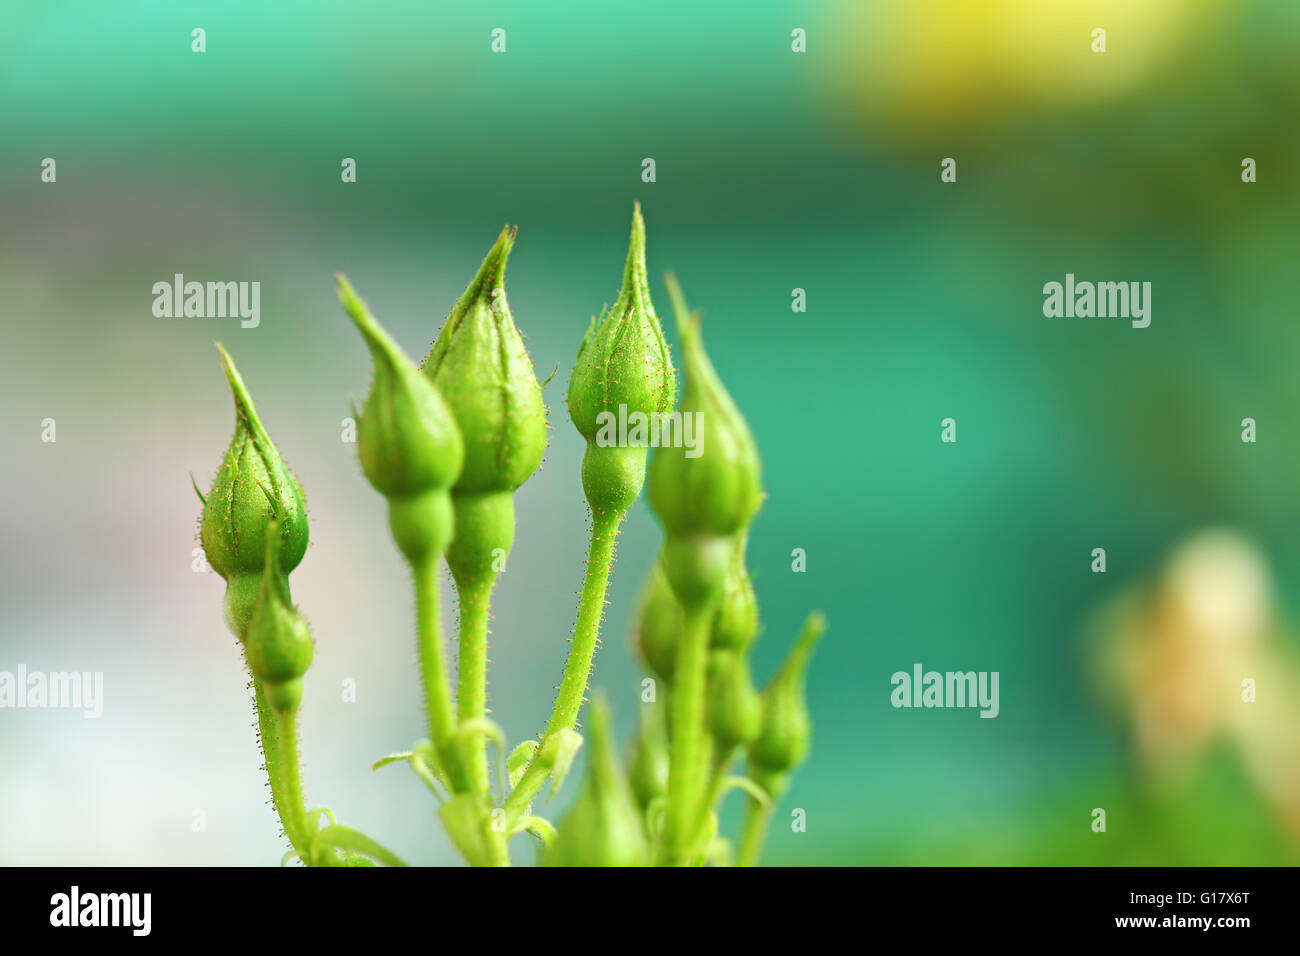 Bunch of rose buds in plant Stock Photo